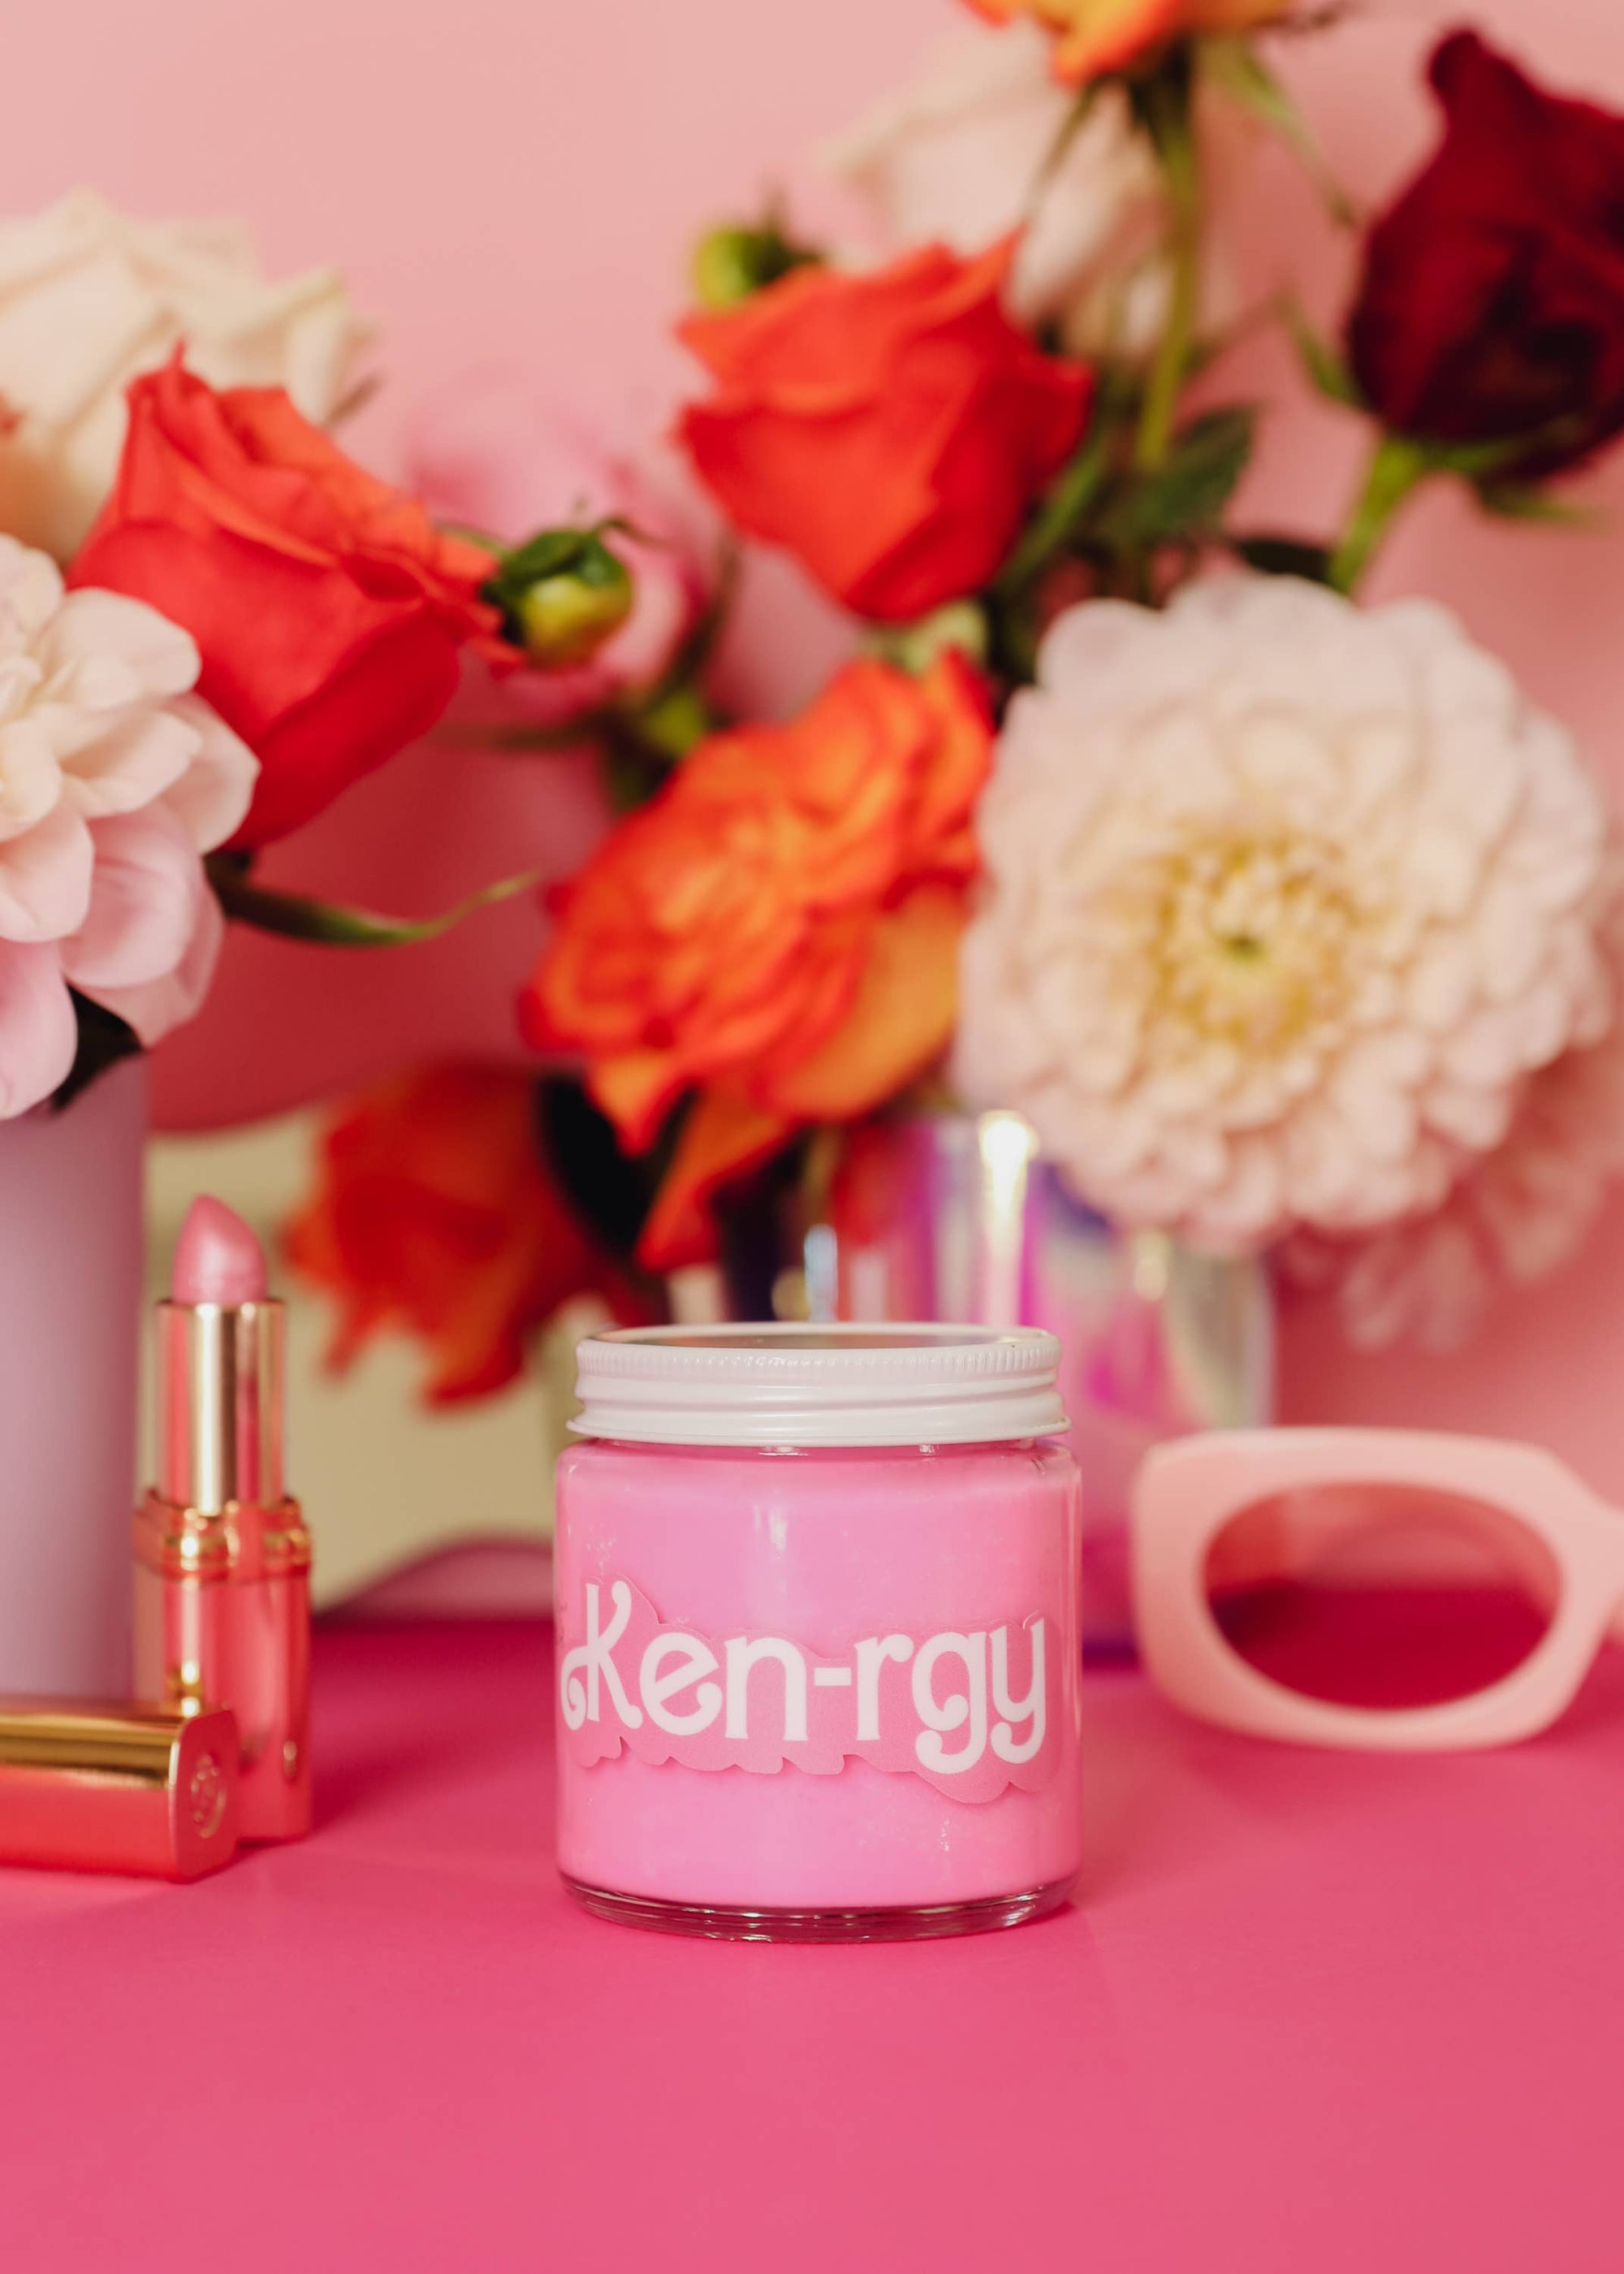 Barbie - Ken-rgy Candle - Hot Pink